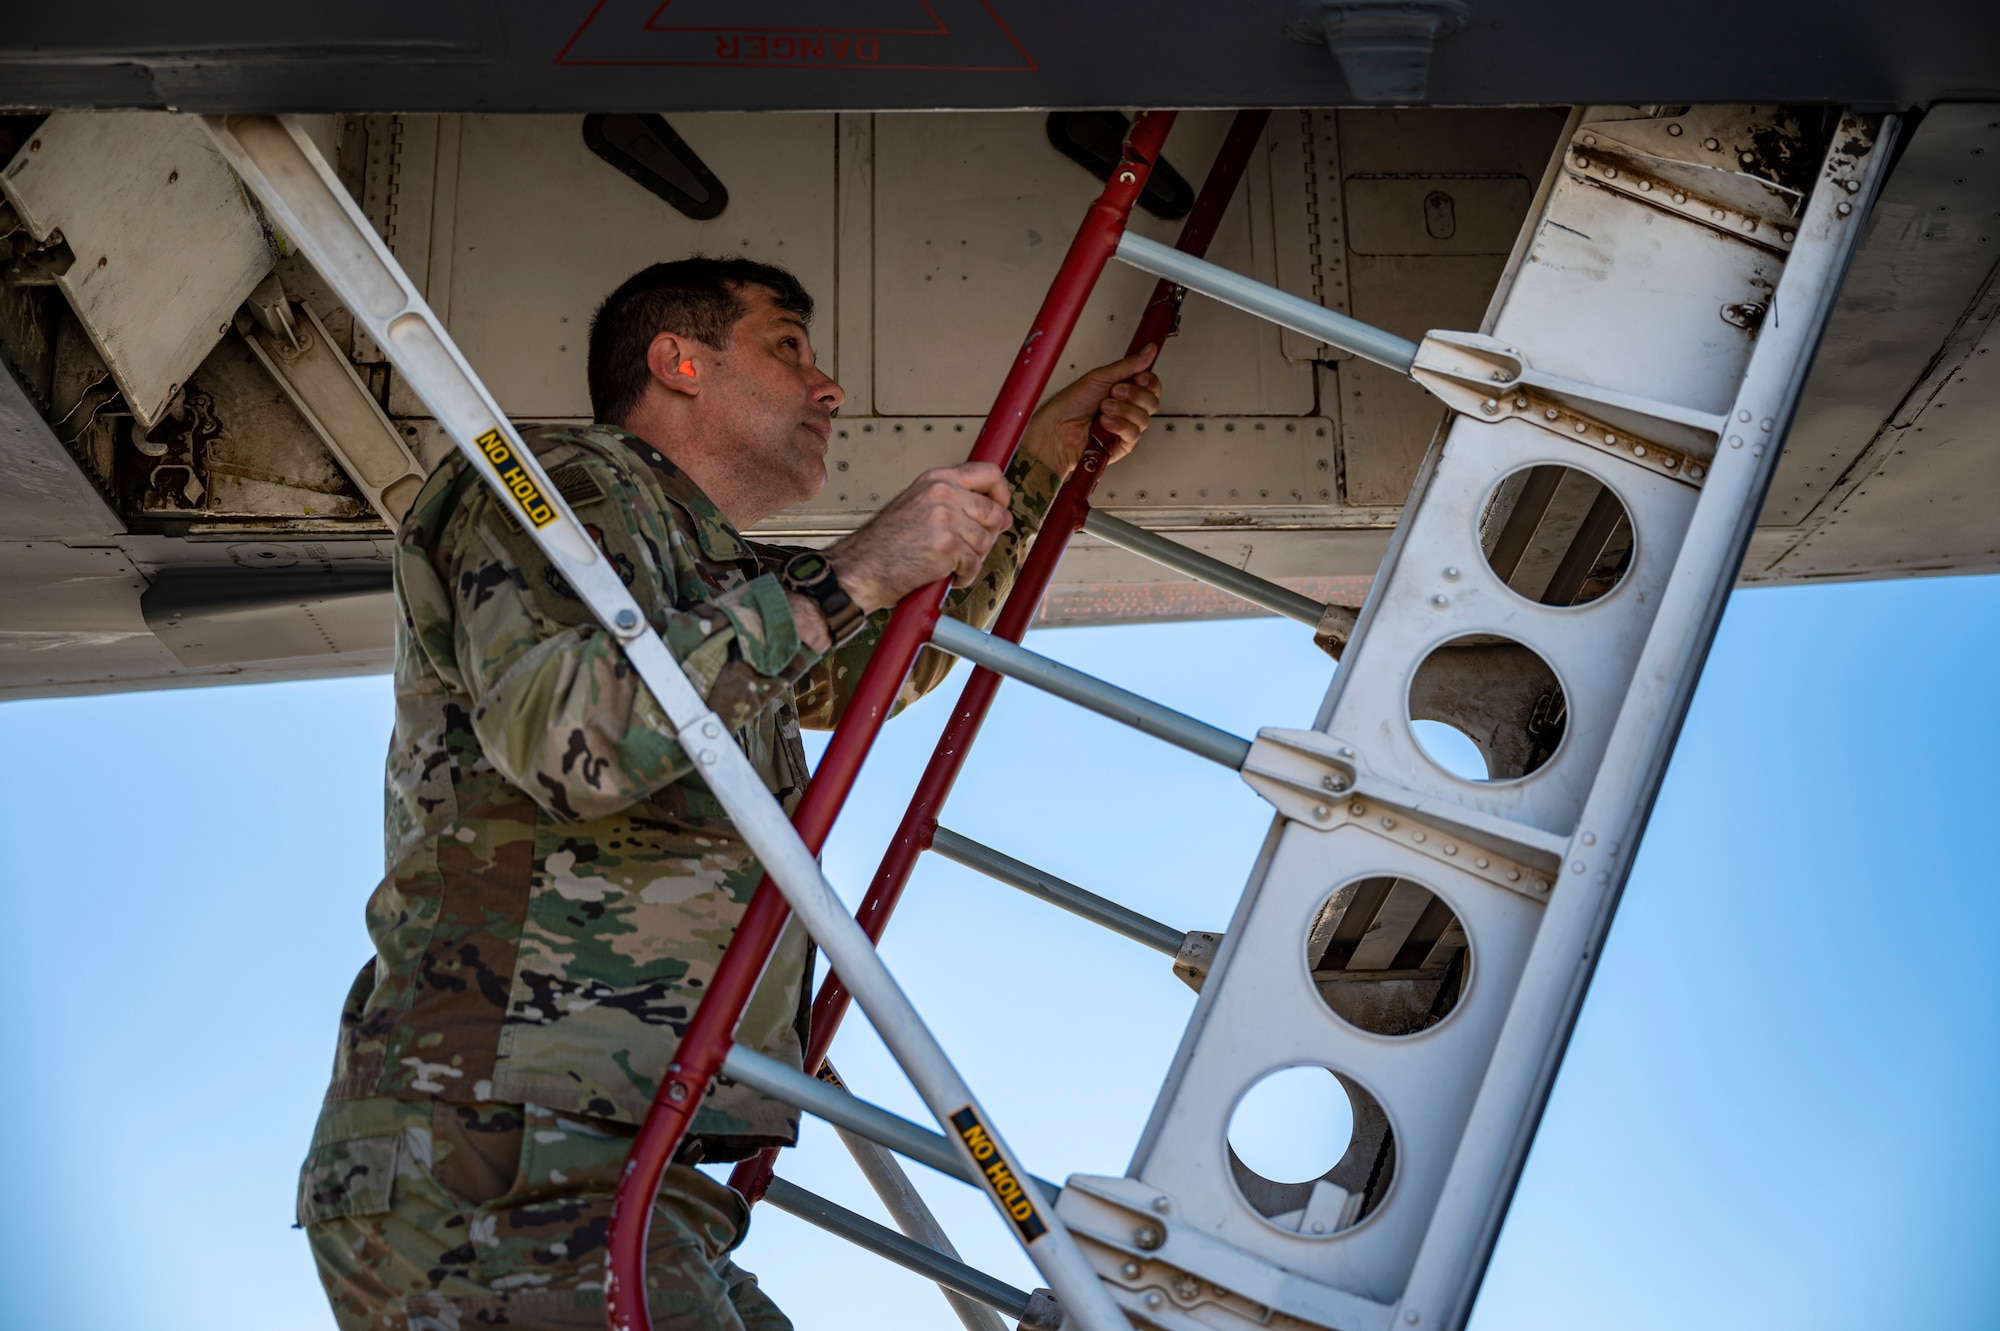 Maj. Gen. Andrew Gebara, 8th Air Force and Joint-Global Strike Operations Center commander, climbs into a B-1B Lancer at Dyess Air Force Base, Texas, Aug. 23, 2021. As the commander of the 8th Air Force and J-GSOC, Gebara presides over the entire bomber inventory and oversees the Service’s airborne nuclear command and control assets. (U.S. Air Force photo by Senior Airman Colin Hollowell)